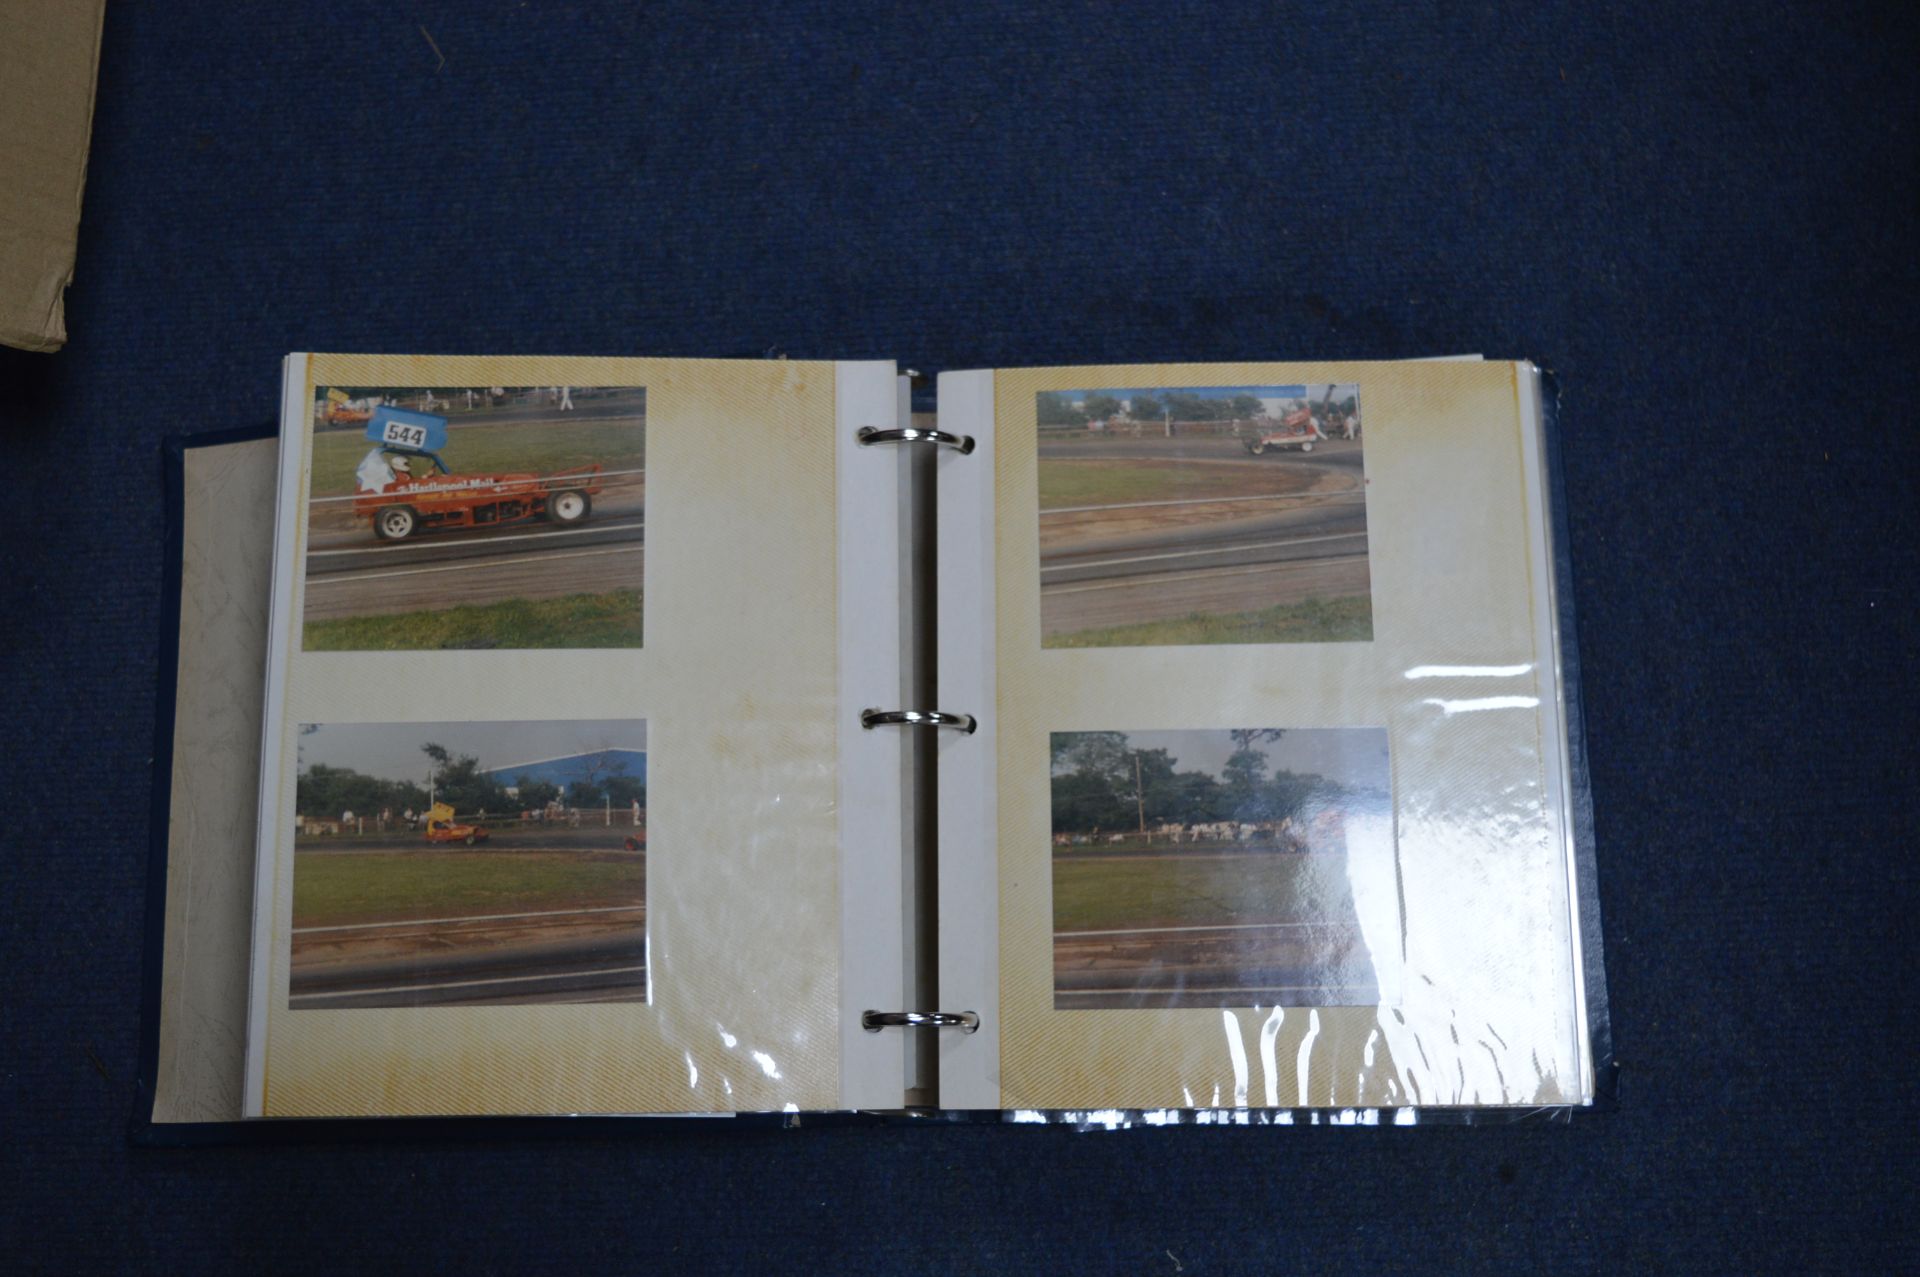 100 Stock Car Racing Vintage 1980's Photographs - Image 2 of 2